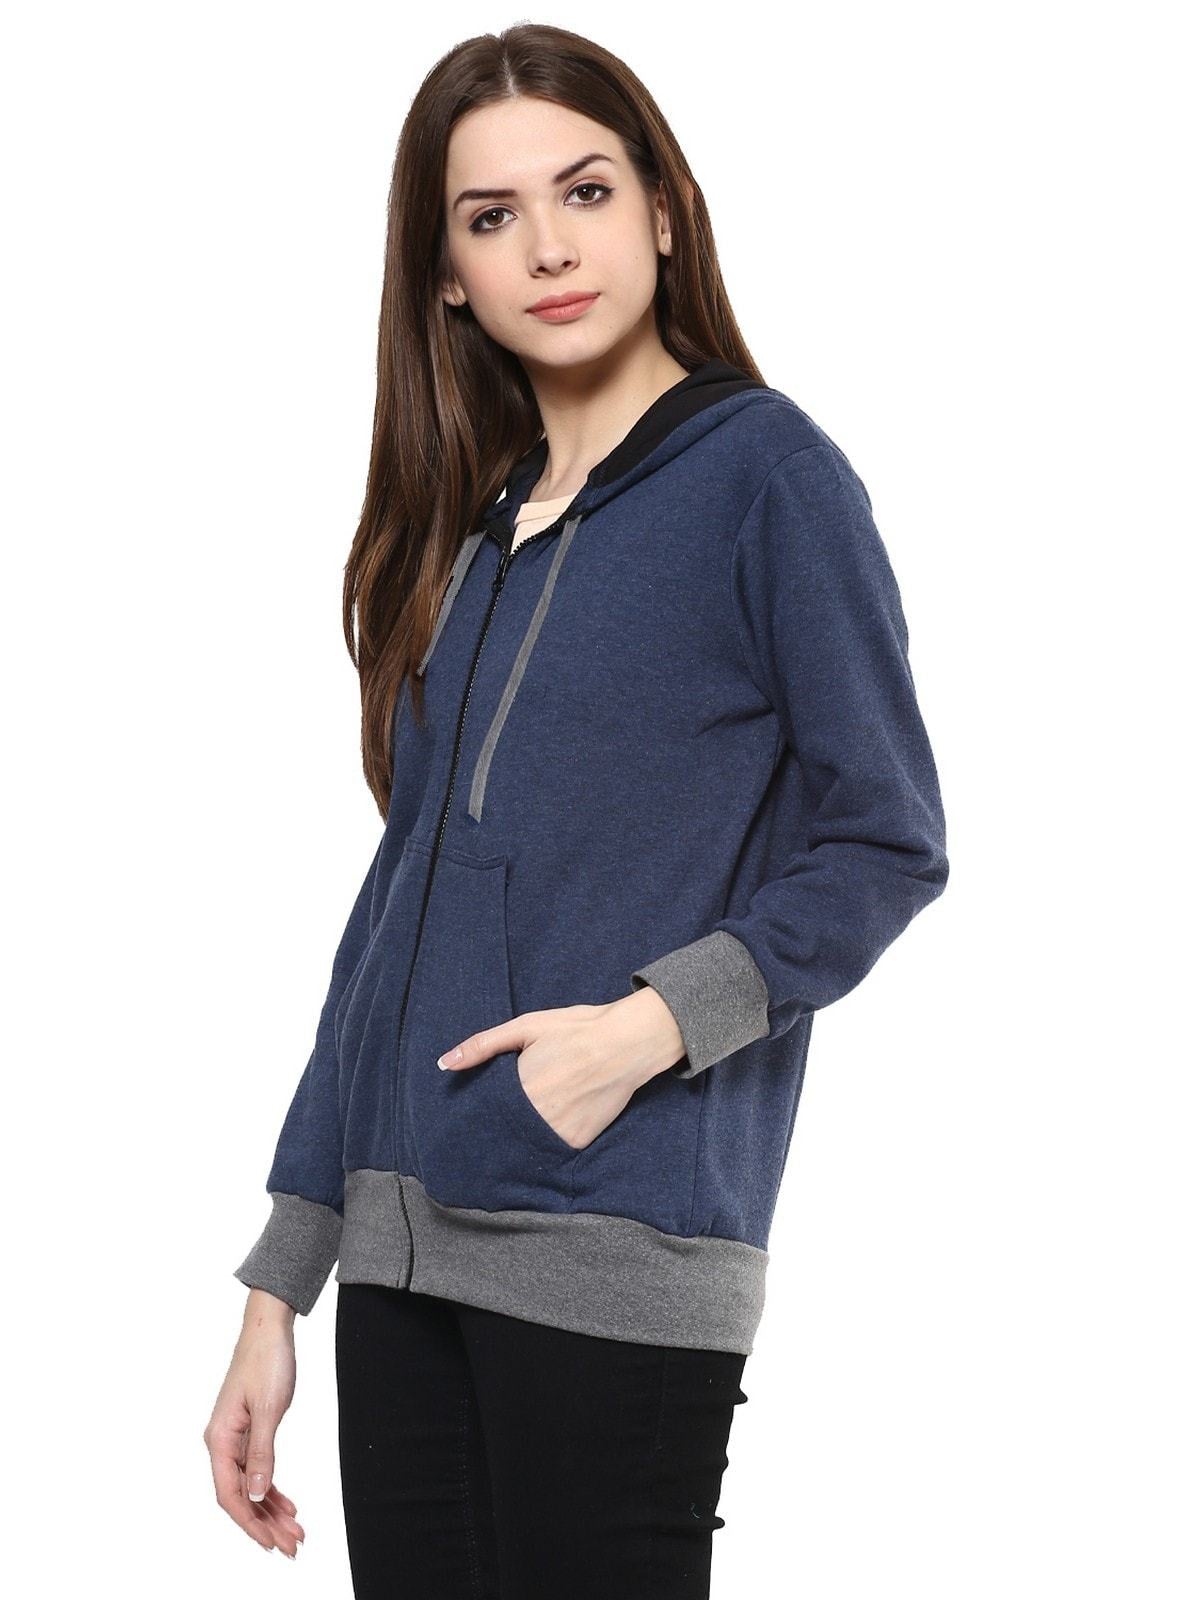 Women's Solid Hooded Sweatshirts With Pockets - Pannkh